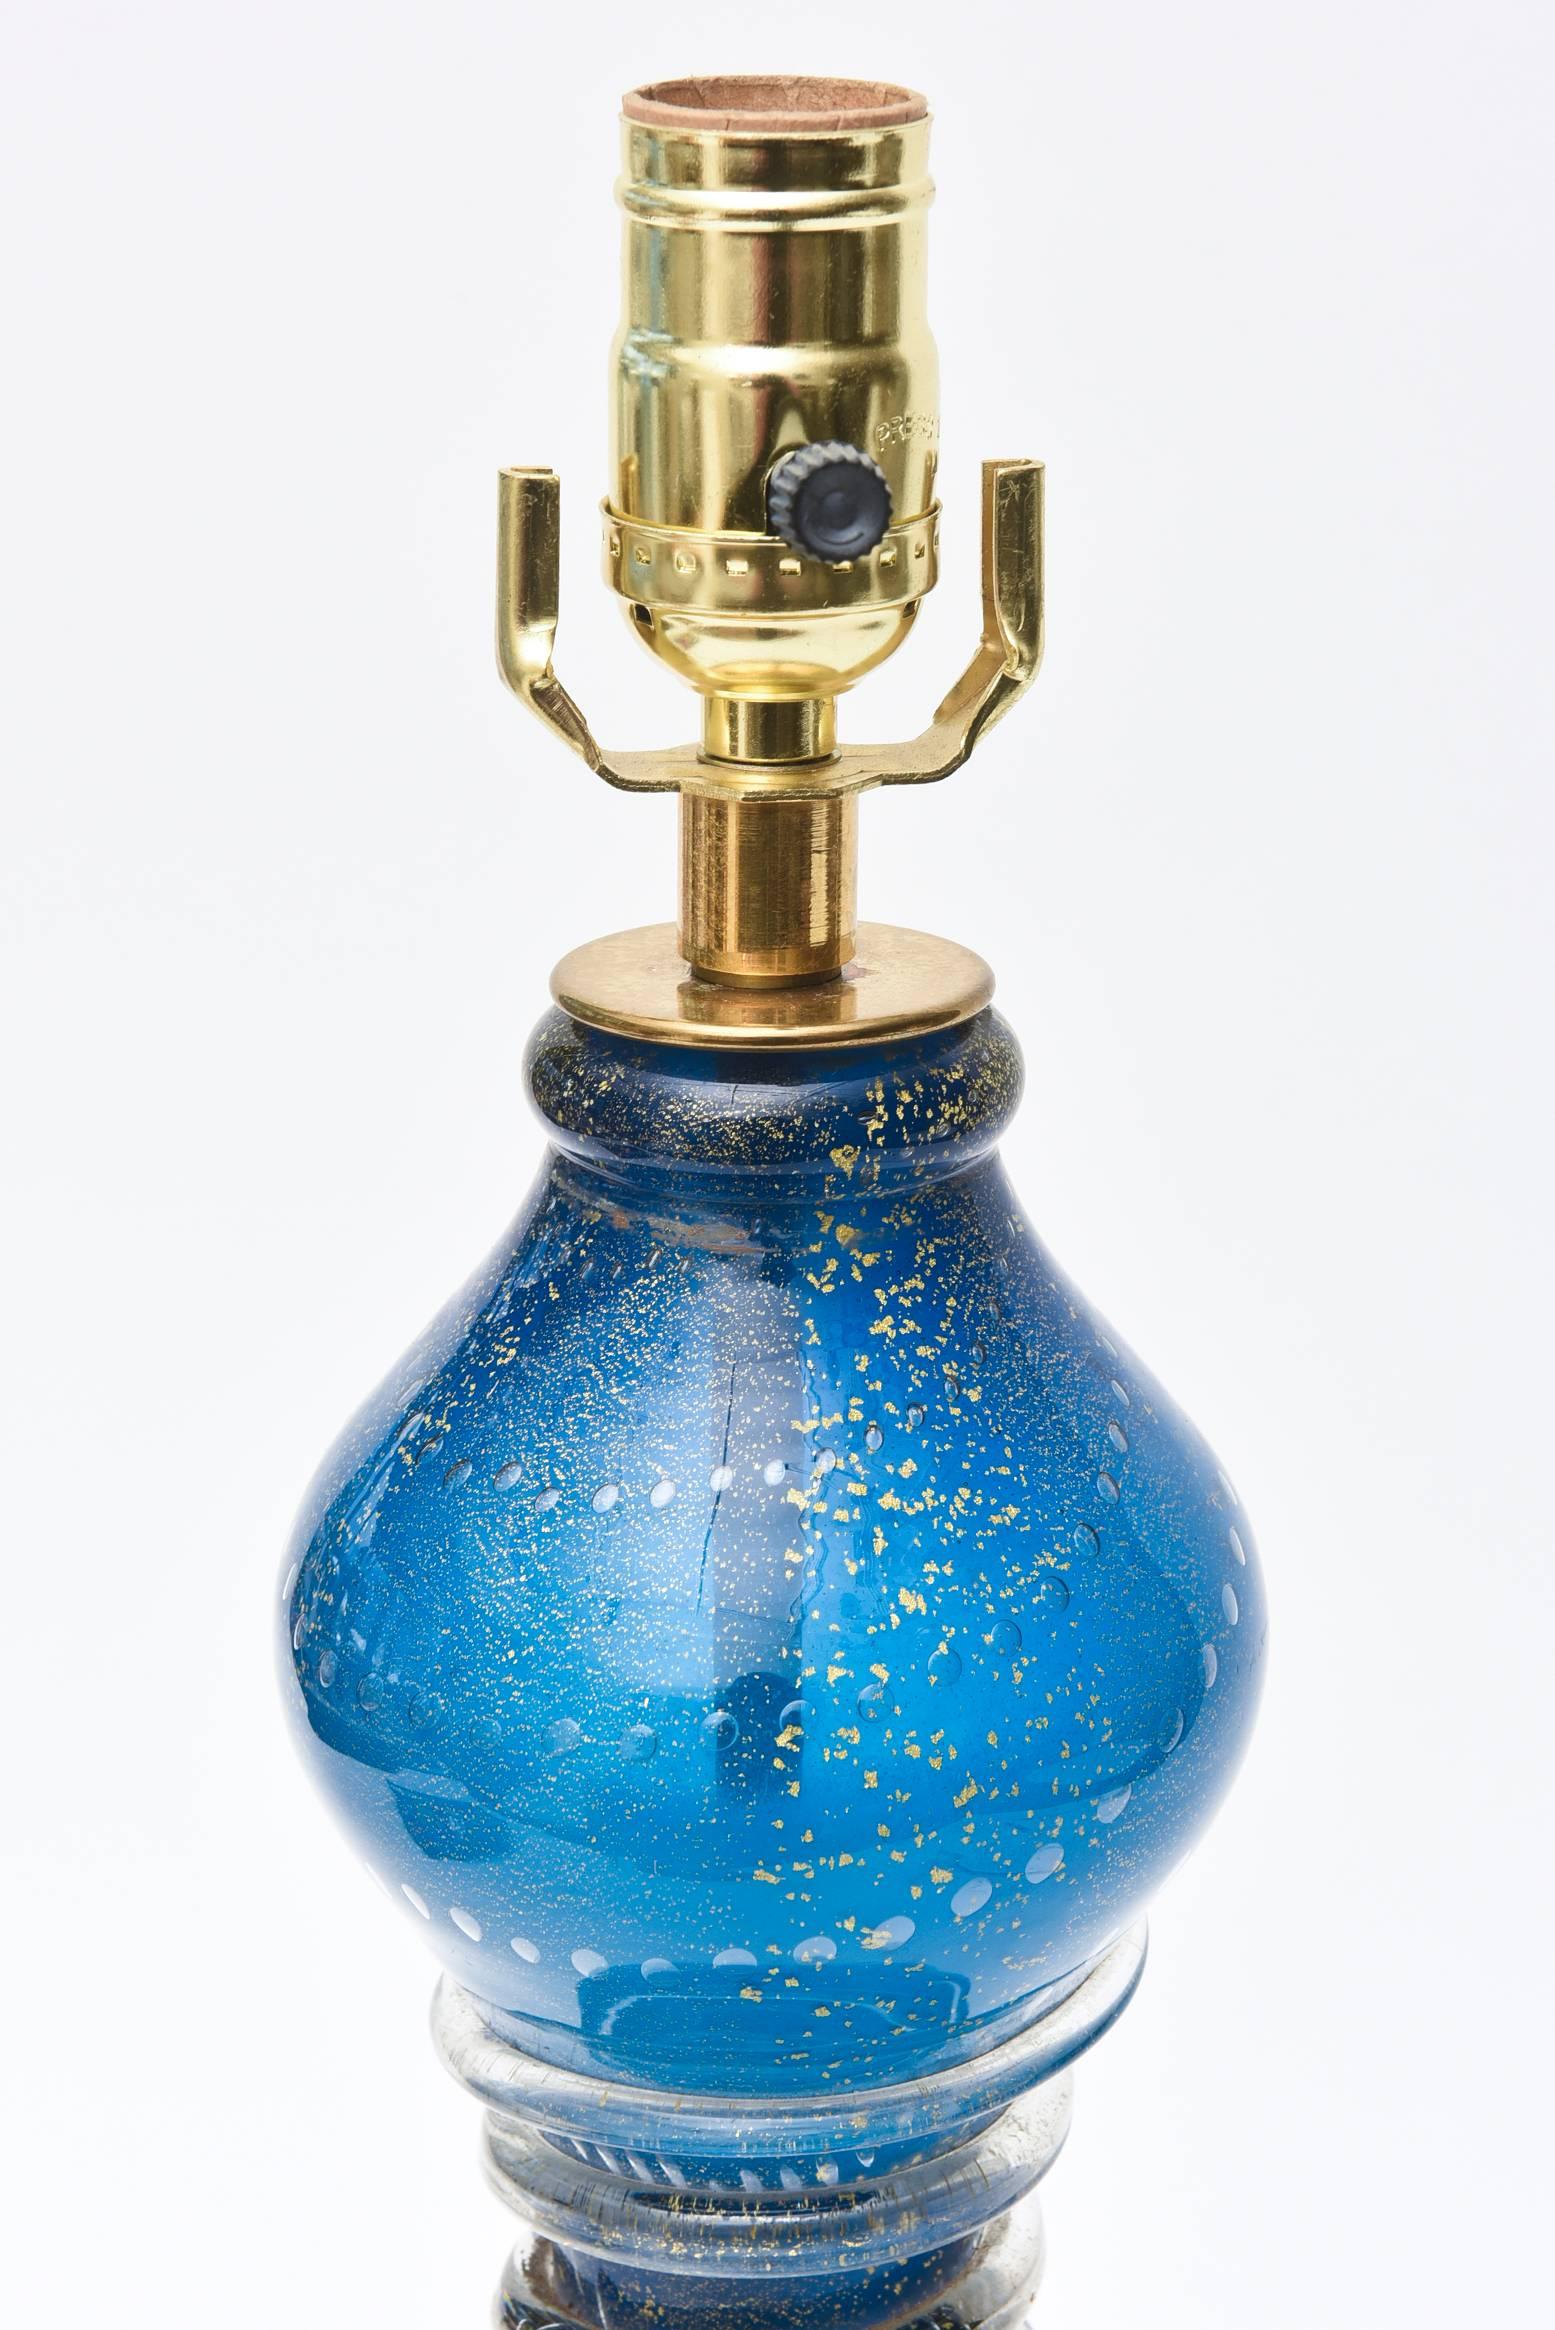 The luscious color of sapphire blue rings in richness and attention.
This lovely and beautiful desk/ table lamp has swirls of applied concentric glass on the center portion with interior bubbles and a great abundance of gold aventurine throughout